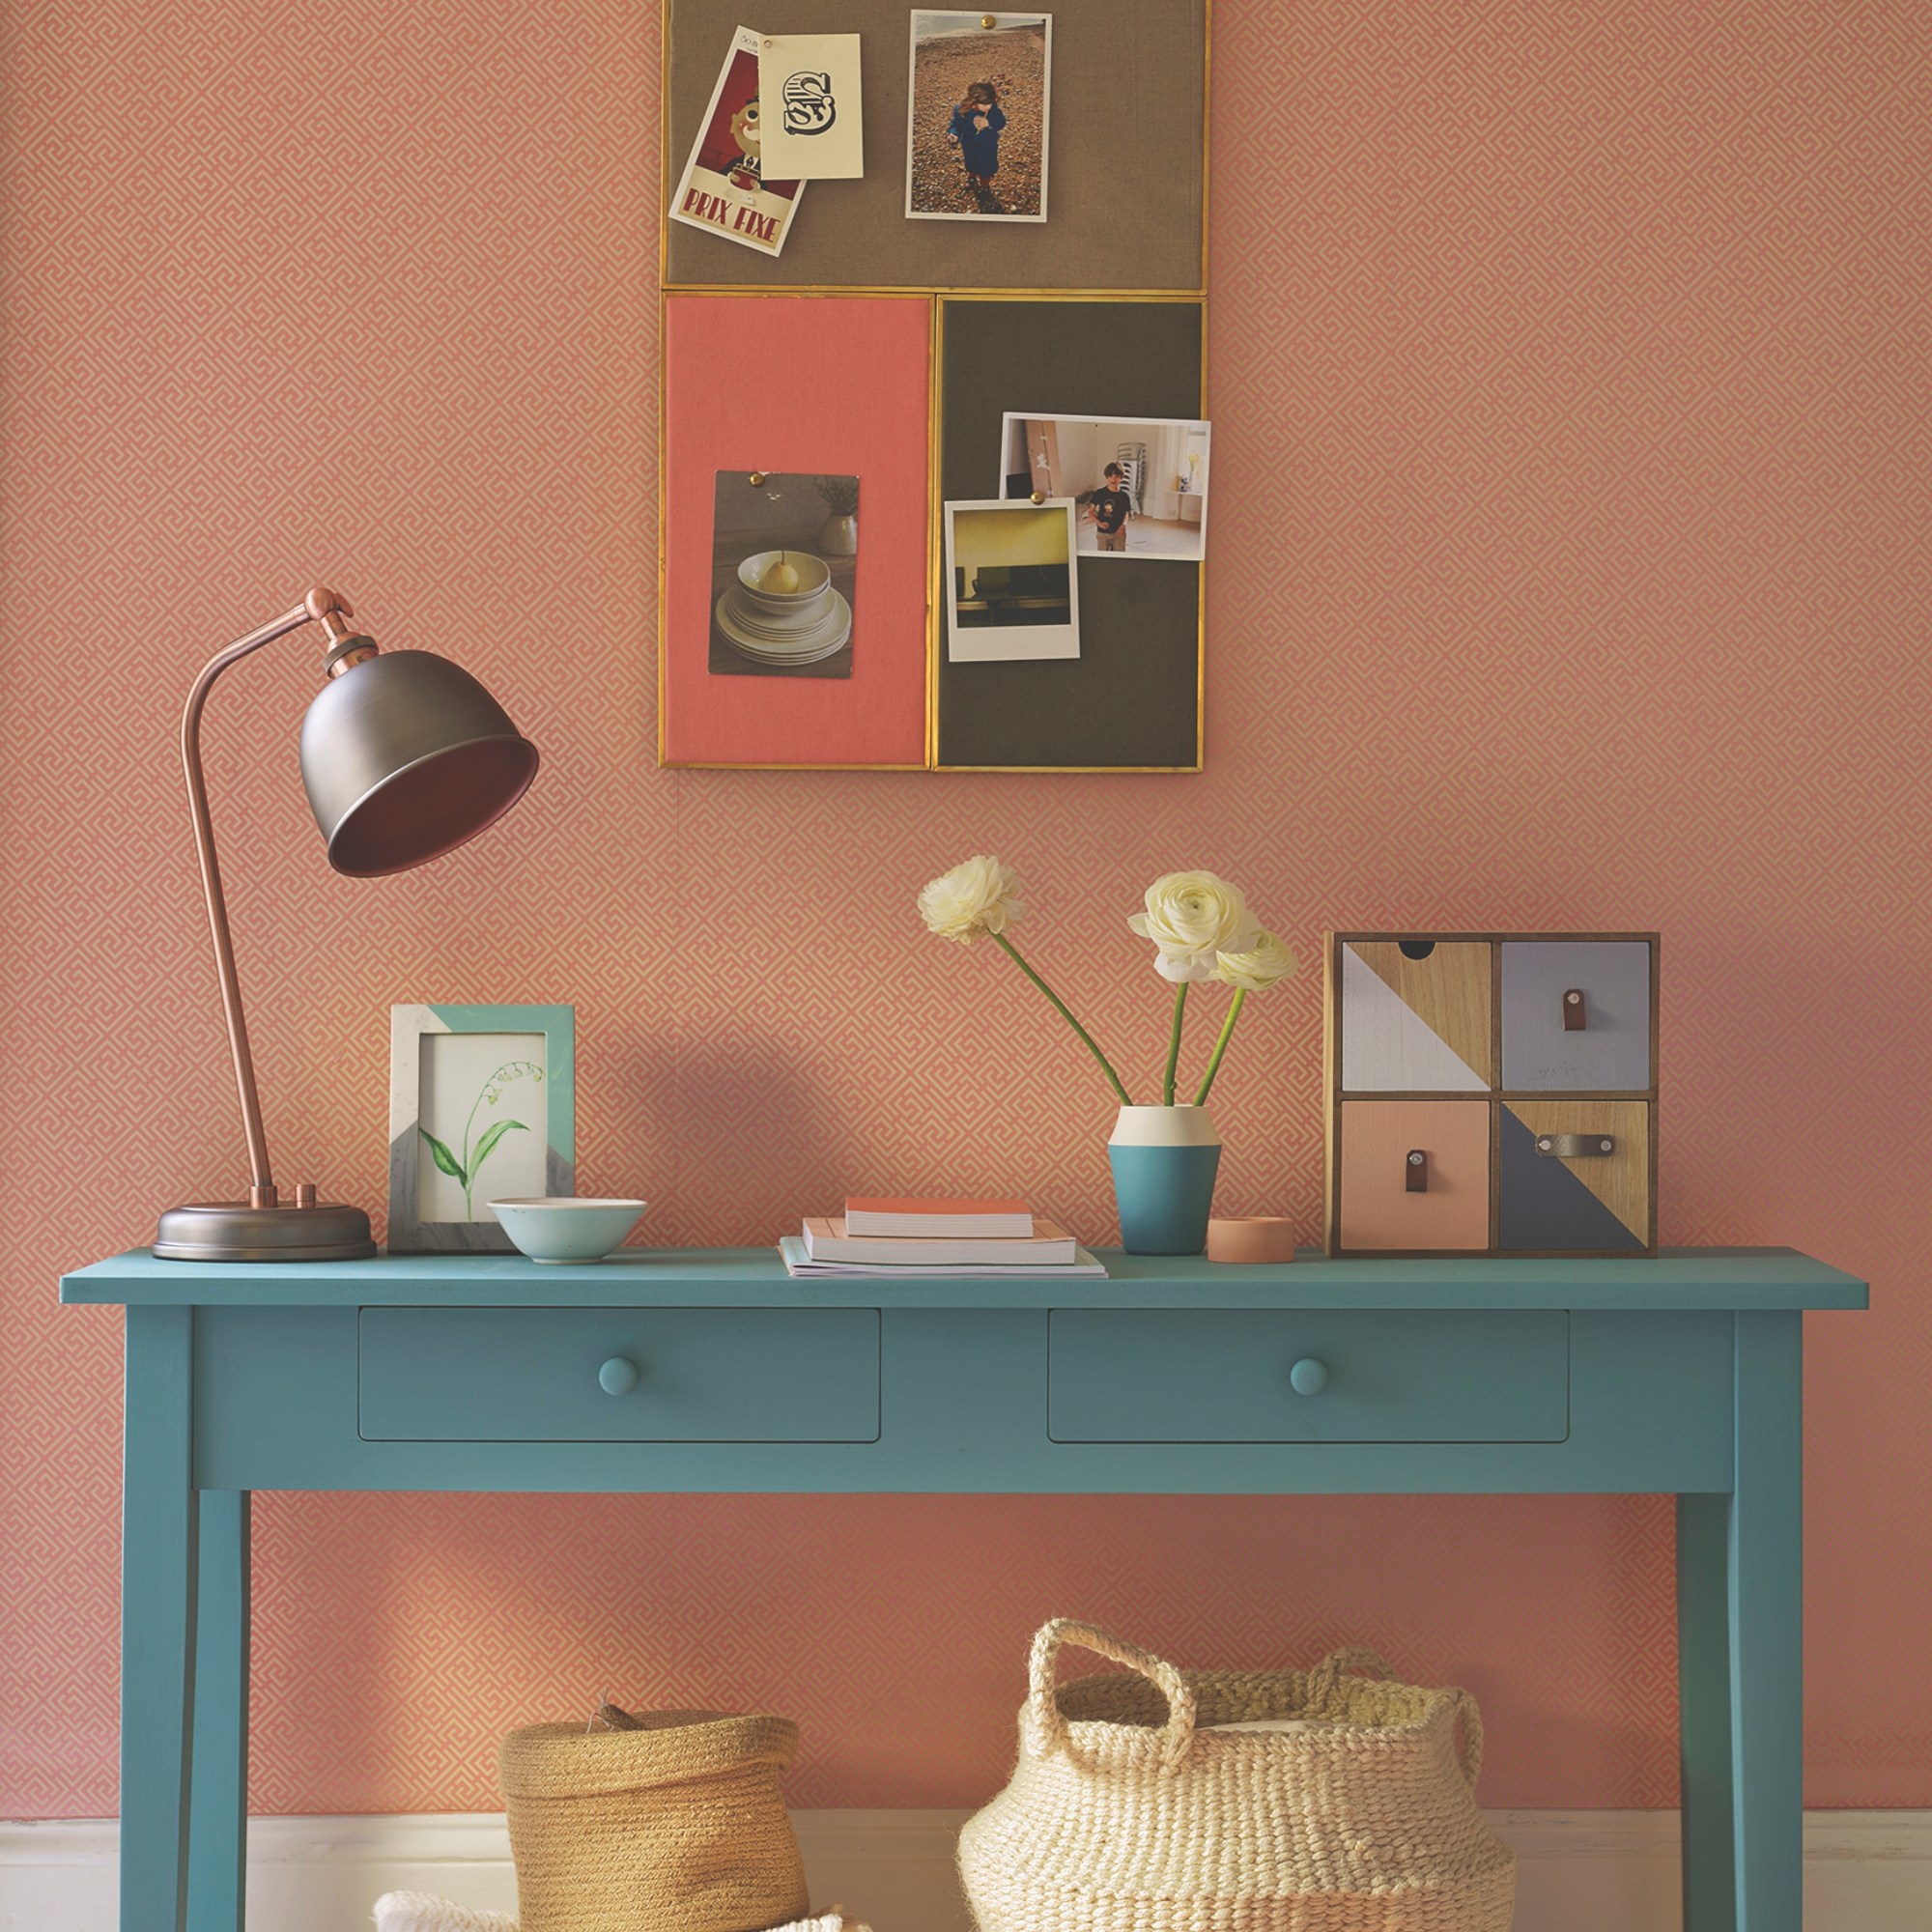 hallway wall decor ideas, coral hallway with bright blue console table, baskets, table lamp, vases, baskets, pinboard on wall